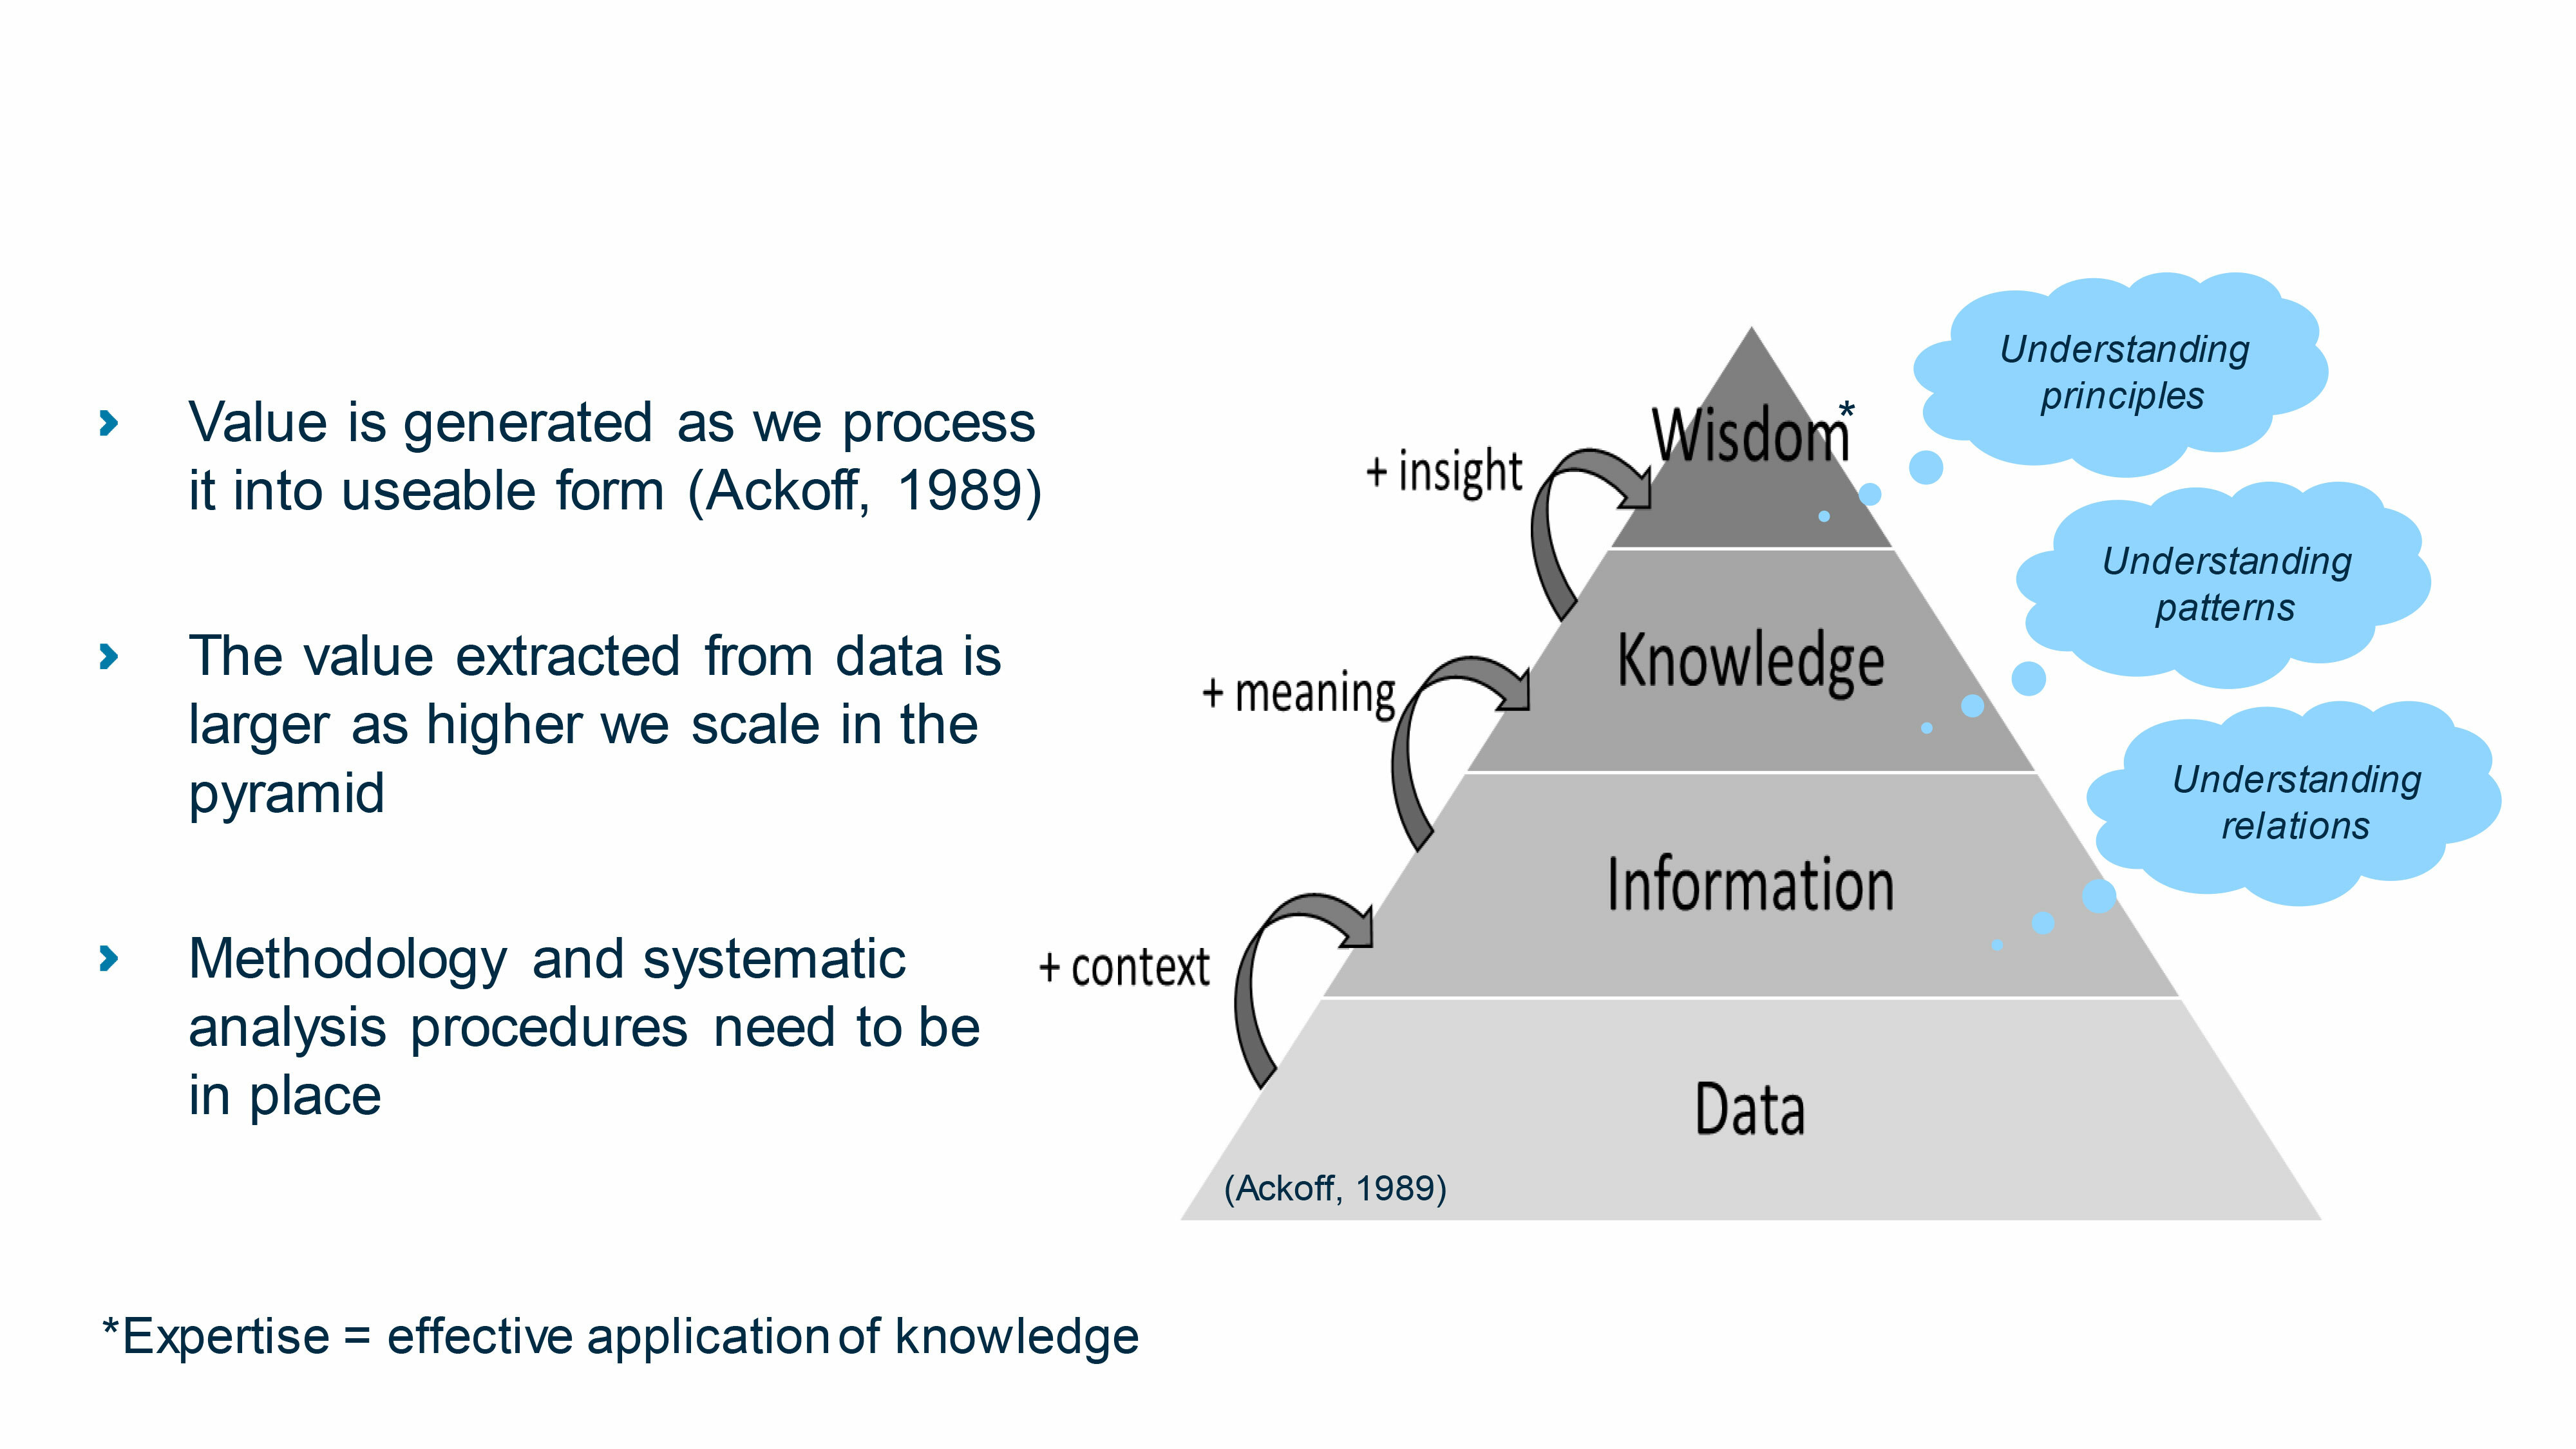 Figure 1 – Data, information, knowledge, wisdom (*expertise) pyramid – Based on Ackoff (1989).